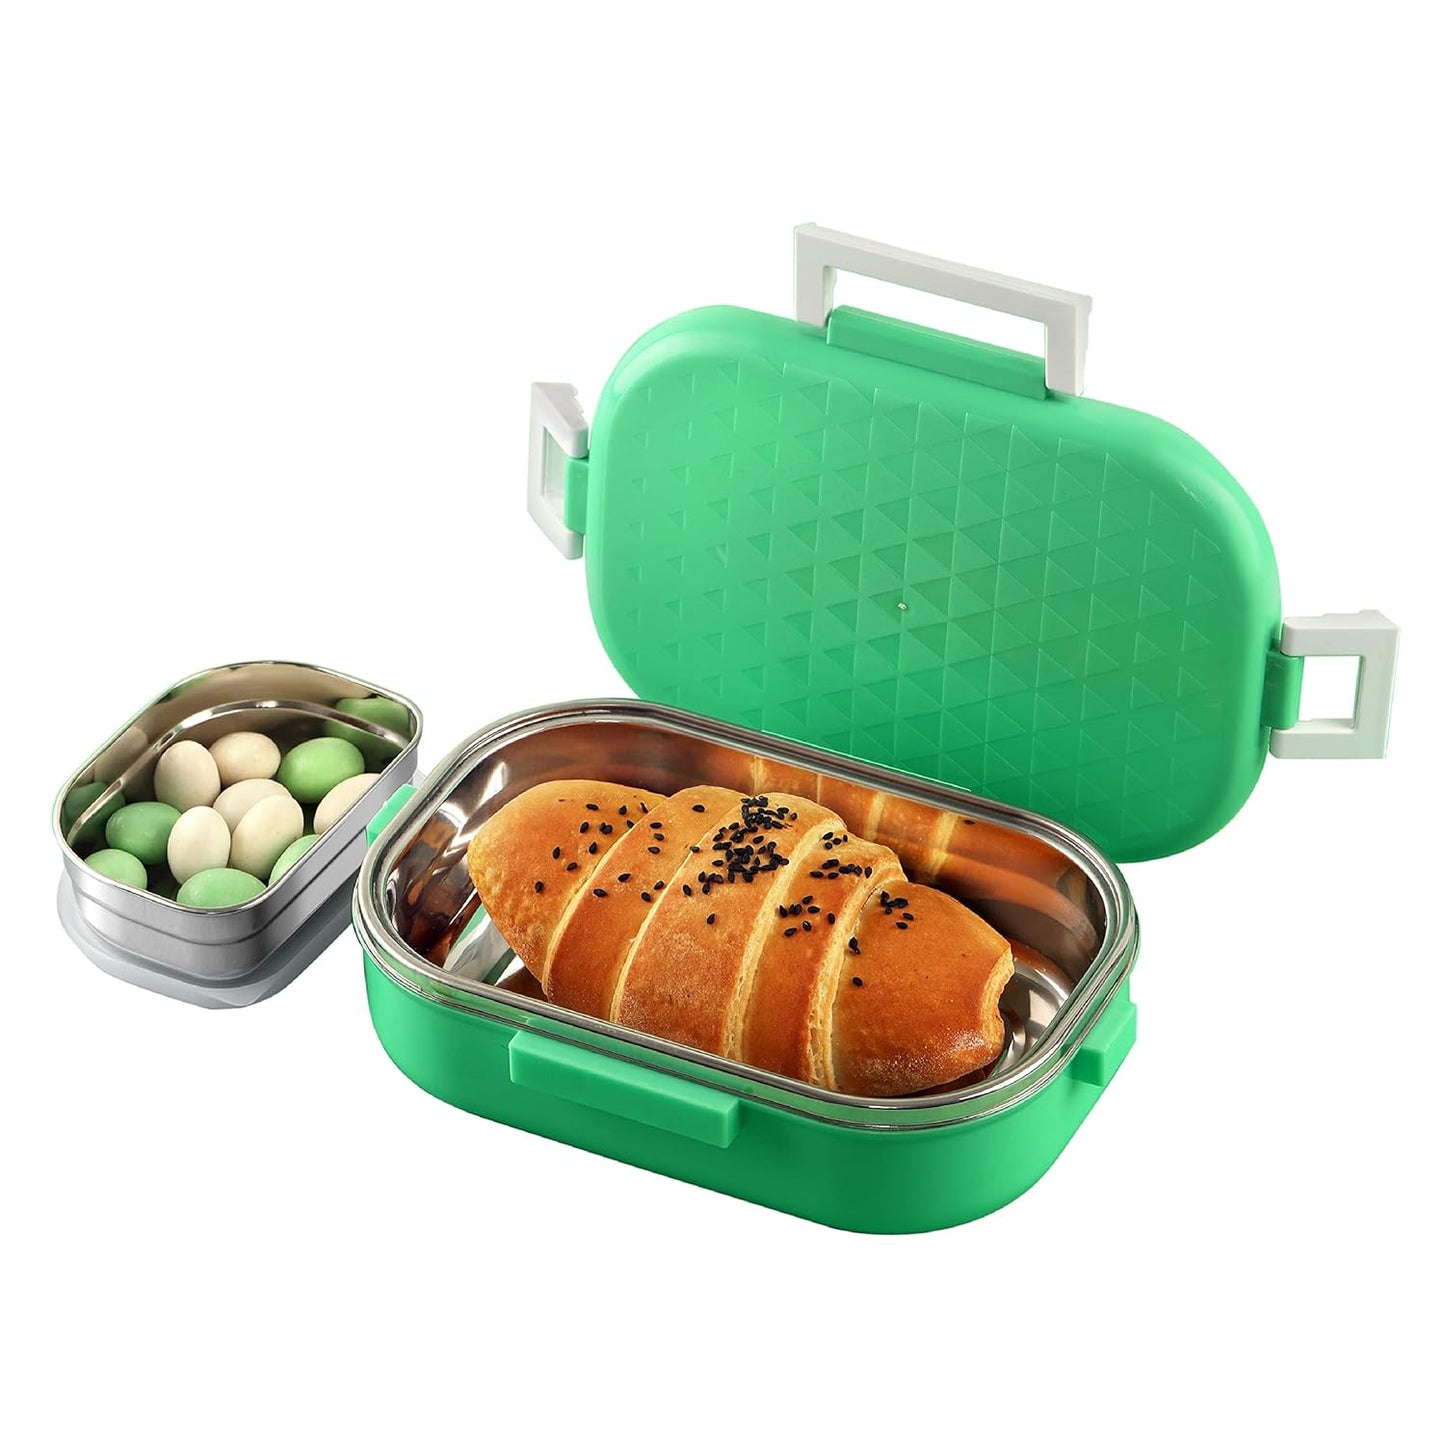 CELLO Altro Neo Lunch Box, Neo Green, 700ml | 2 Units Insulated Lunch Boxes for kids and adult both